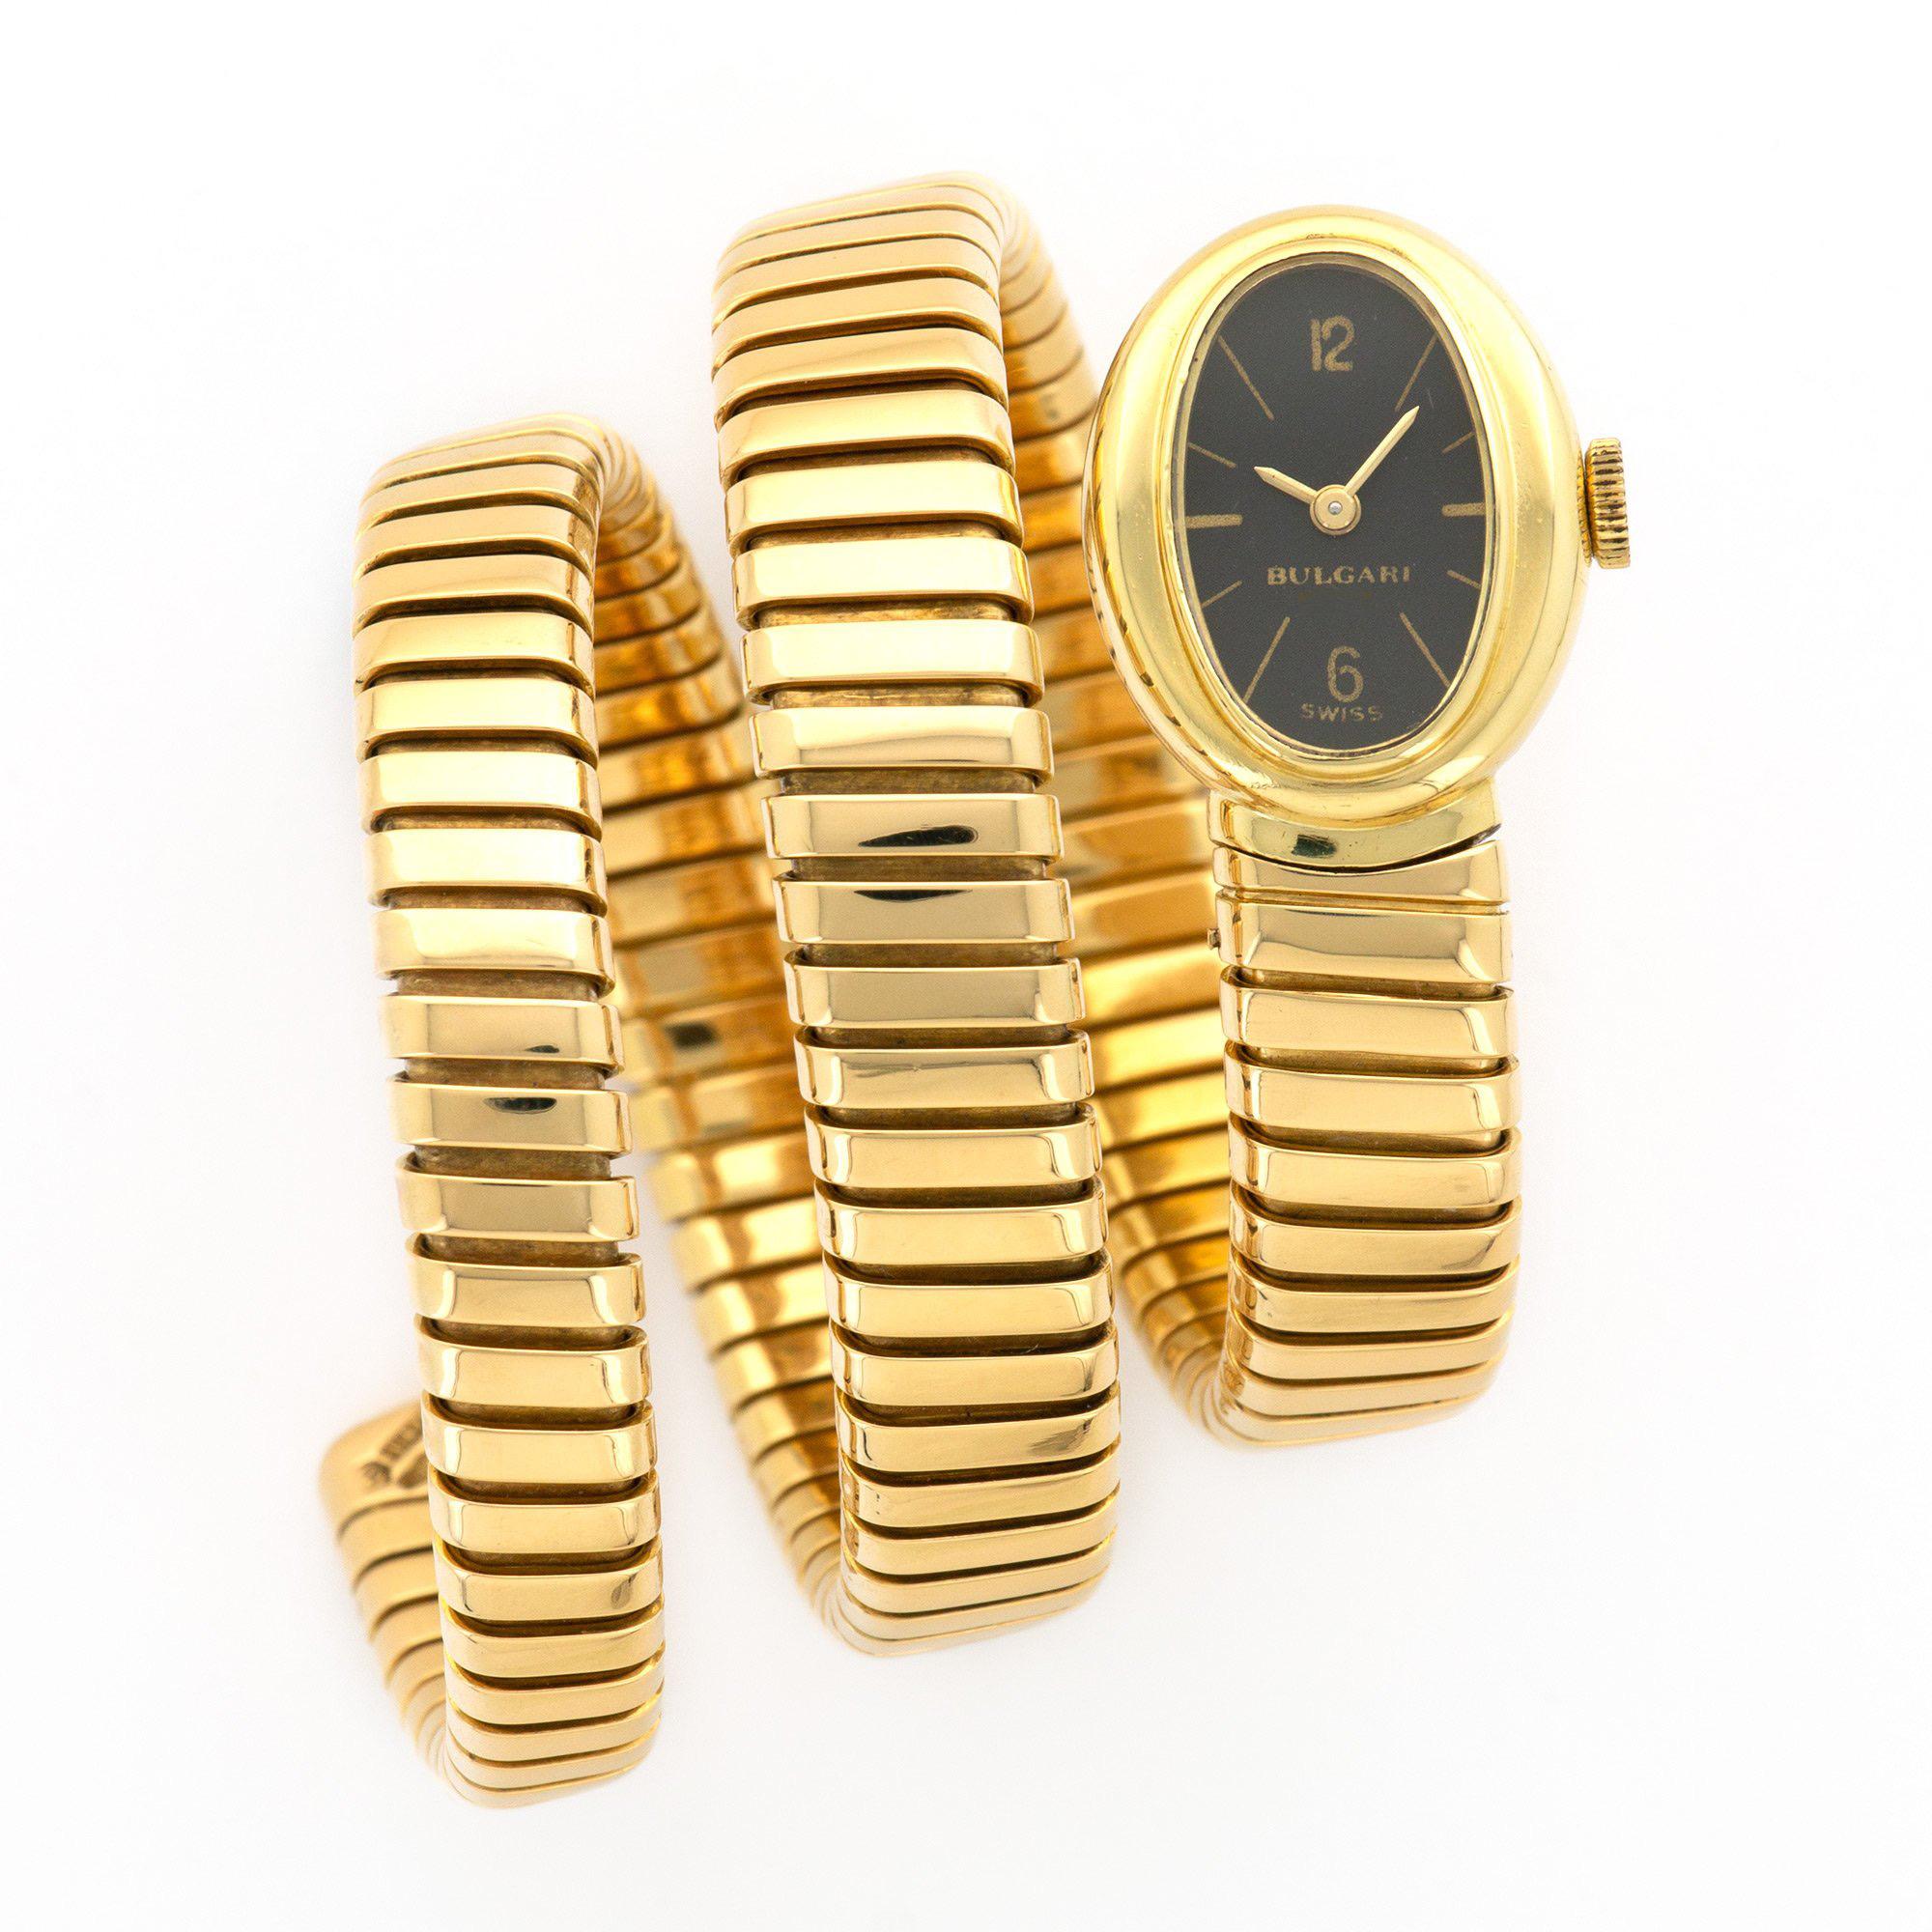 A chic 18 karat yellow gold Tubogas bracelet watch by Bulgari featuring a black dial. Made in Italy, circa 1970s.